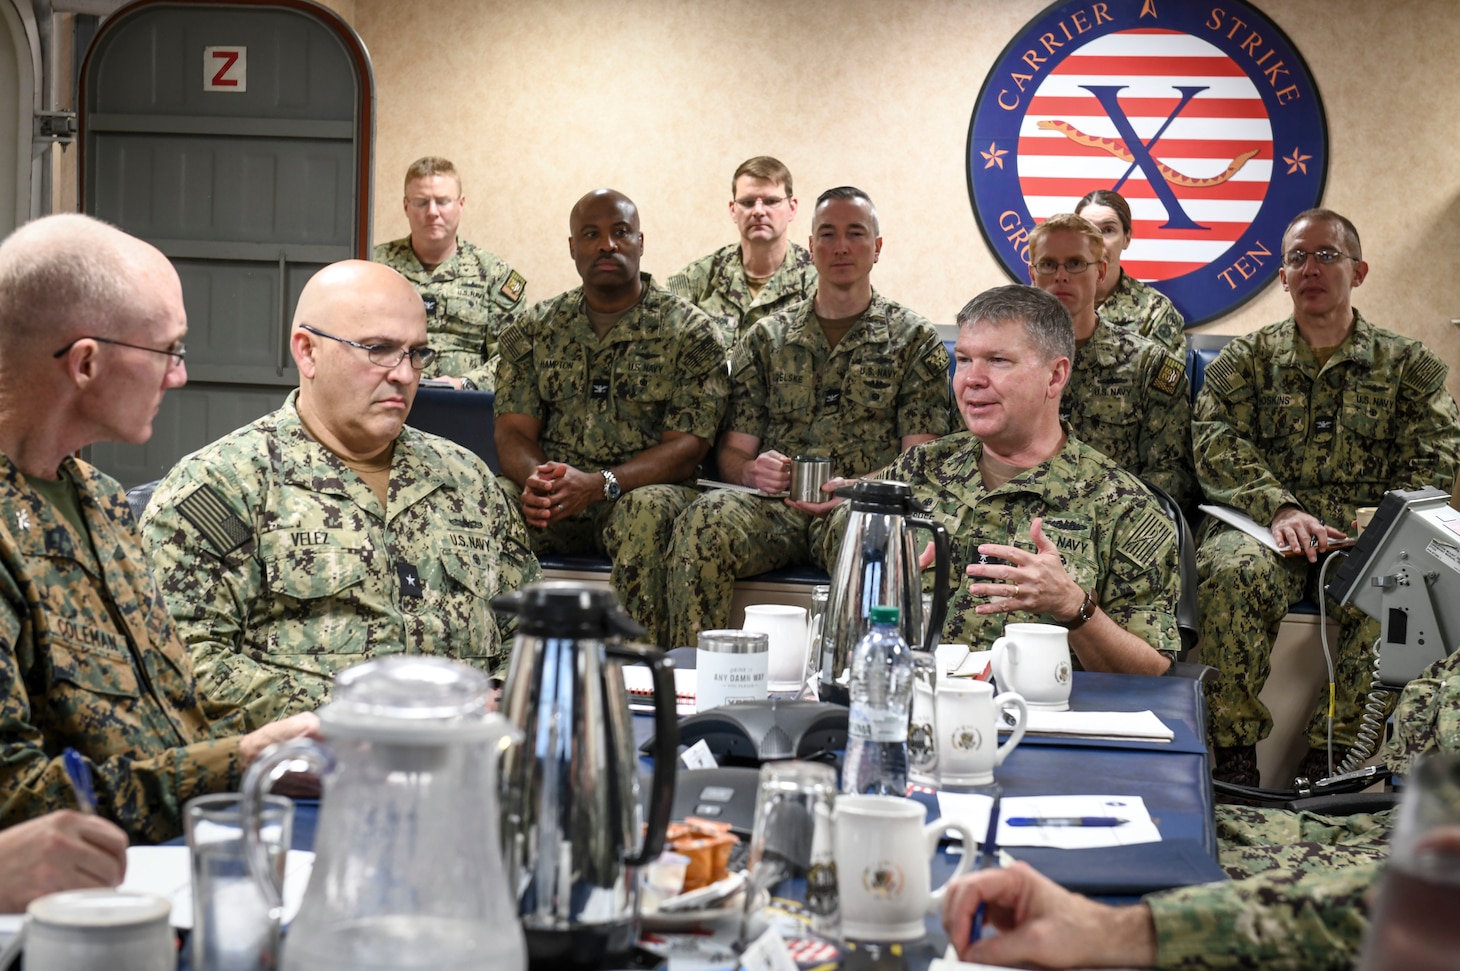 Vice Adm. Thomas Ishee, right, commander, U.S. Sixth Fleet and commander, Naval Striking and Support Forces NATO, discusses leadership and maritime warfighting with U.S. Navy leadership during the Commander, Task Force (CTF) Commanders Conference aboard the Nimitz-class aircraft carrier USS George H.W. Bush (CVN 77) in Naples, Italy, Nov. 30, 2022.